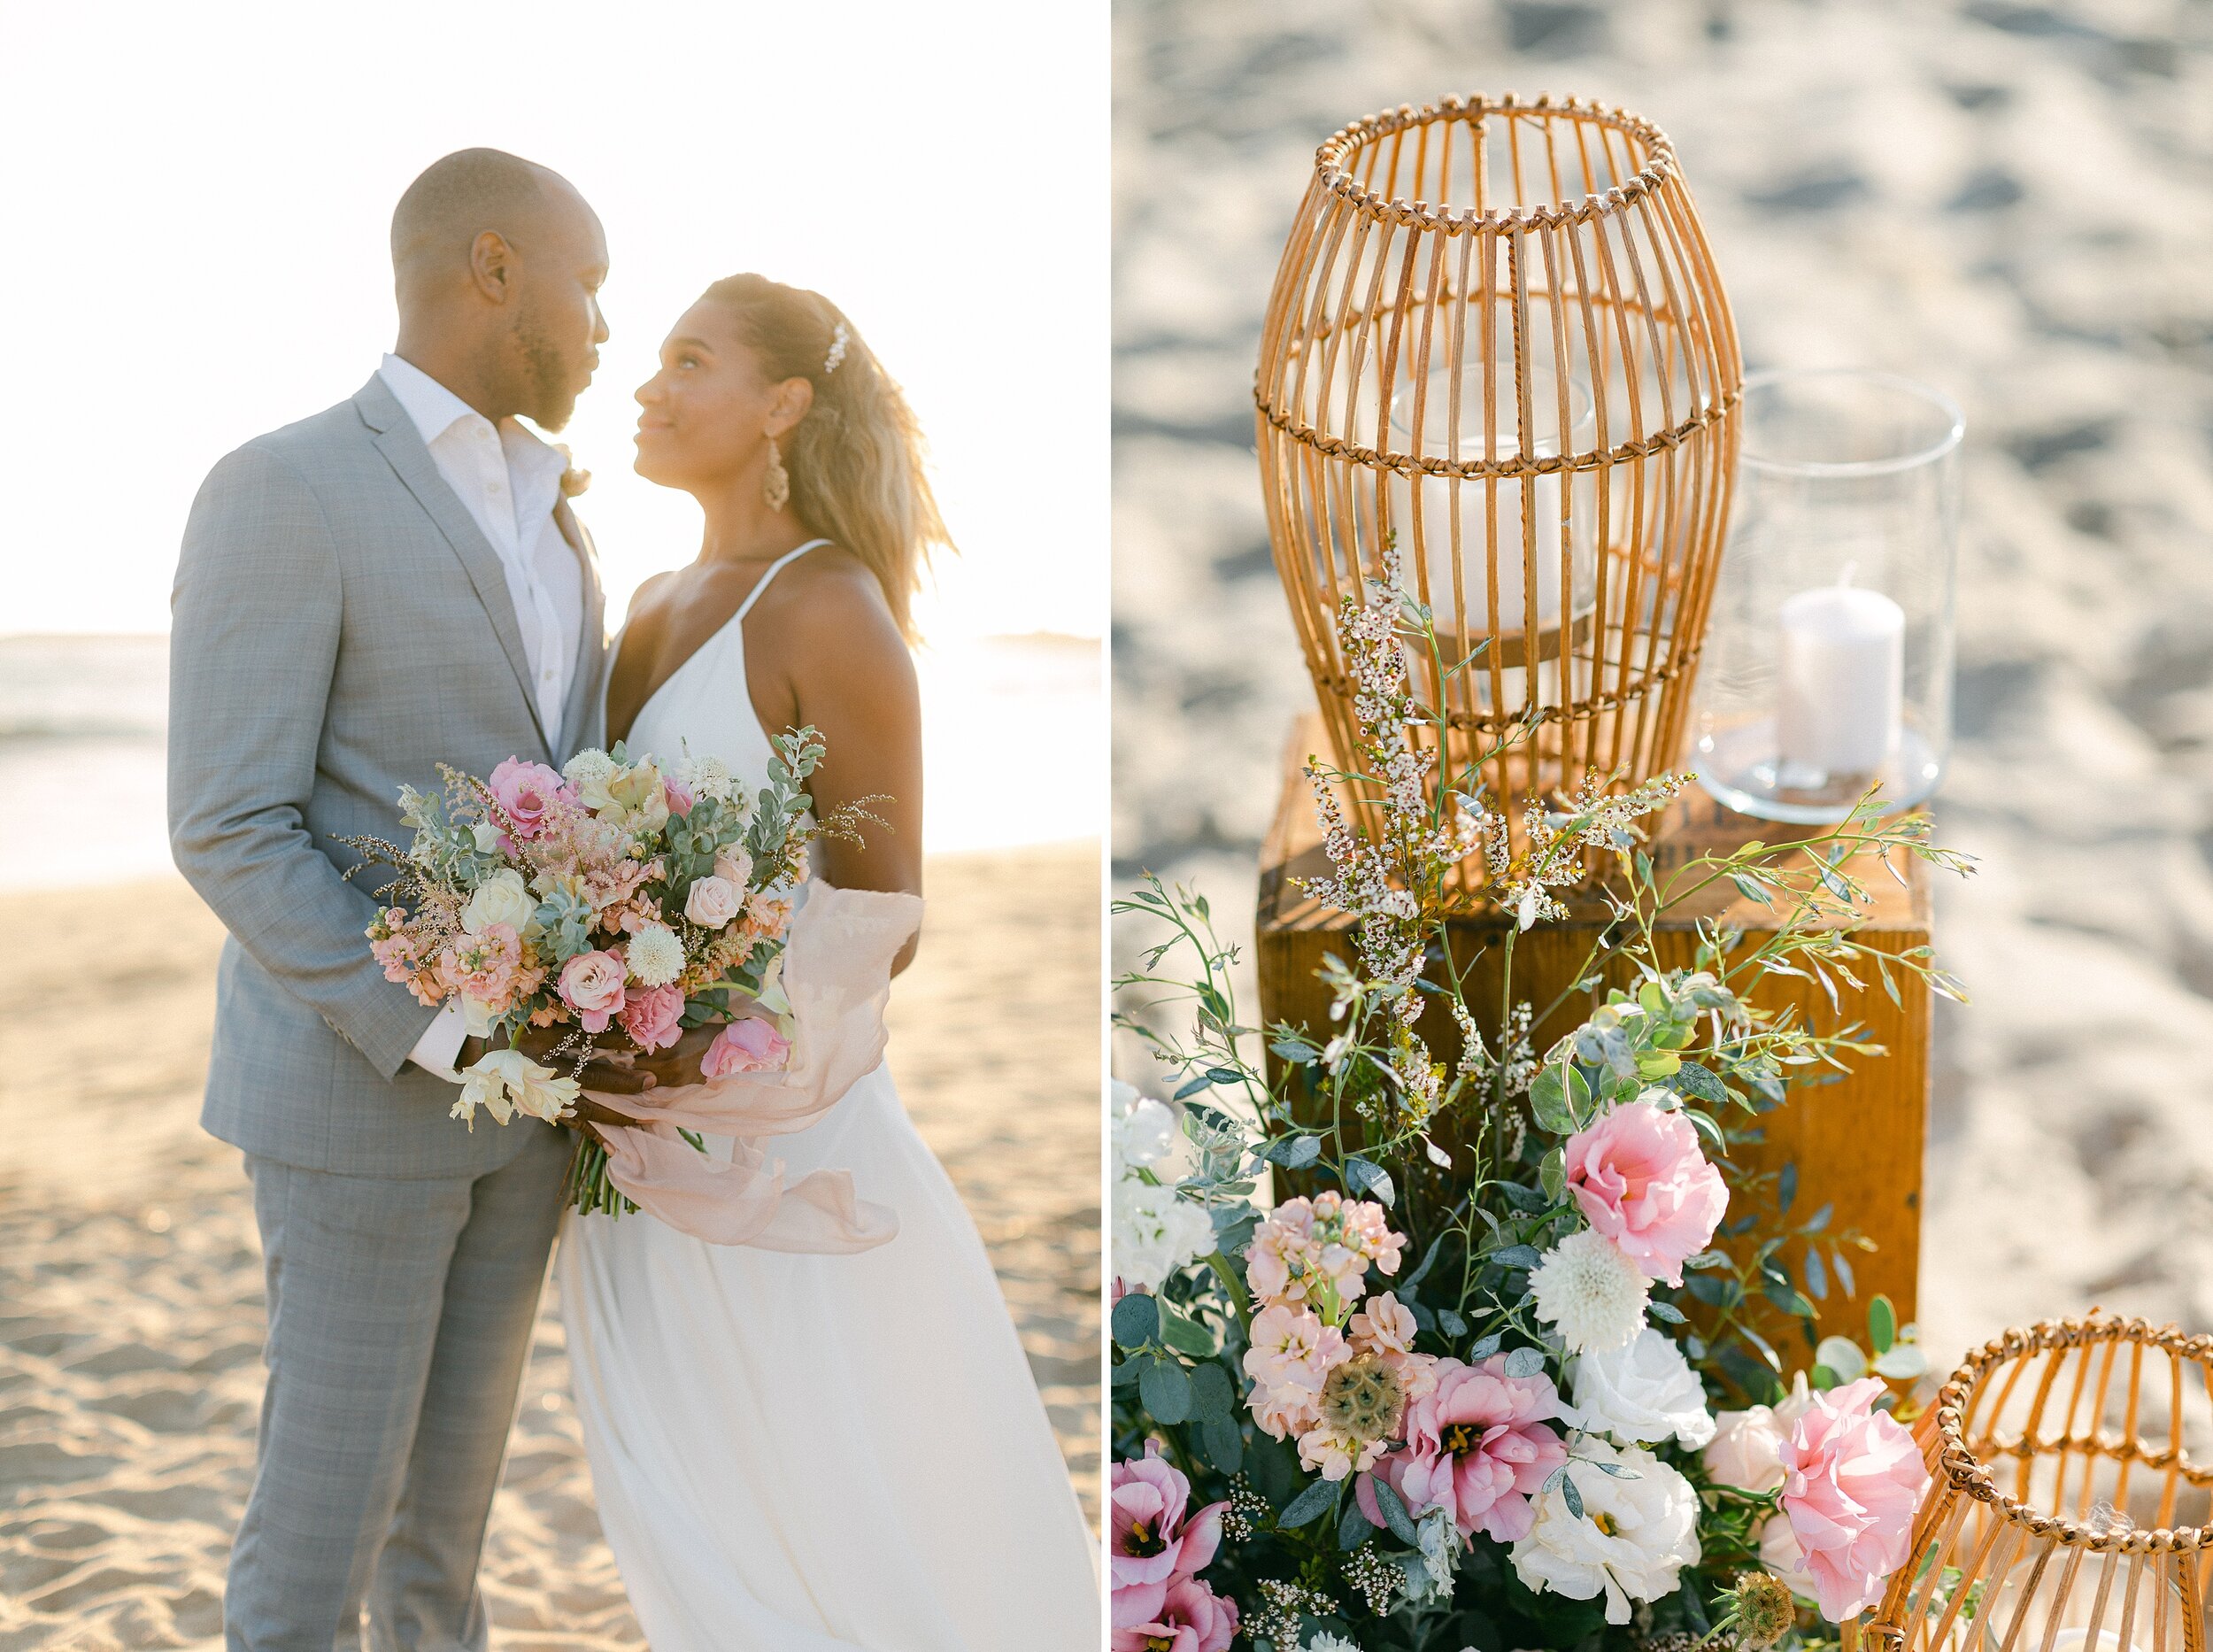 This romantic beachside elopement altar featured large ratan candle holders, white, pink and blush floral arrangements and a driftwood arch with silk ribbons.